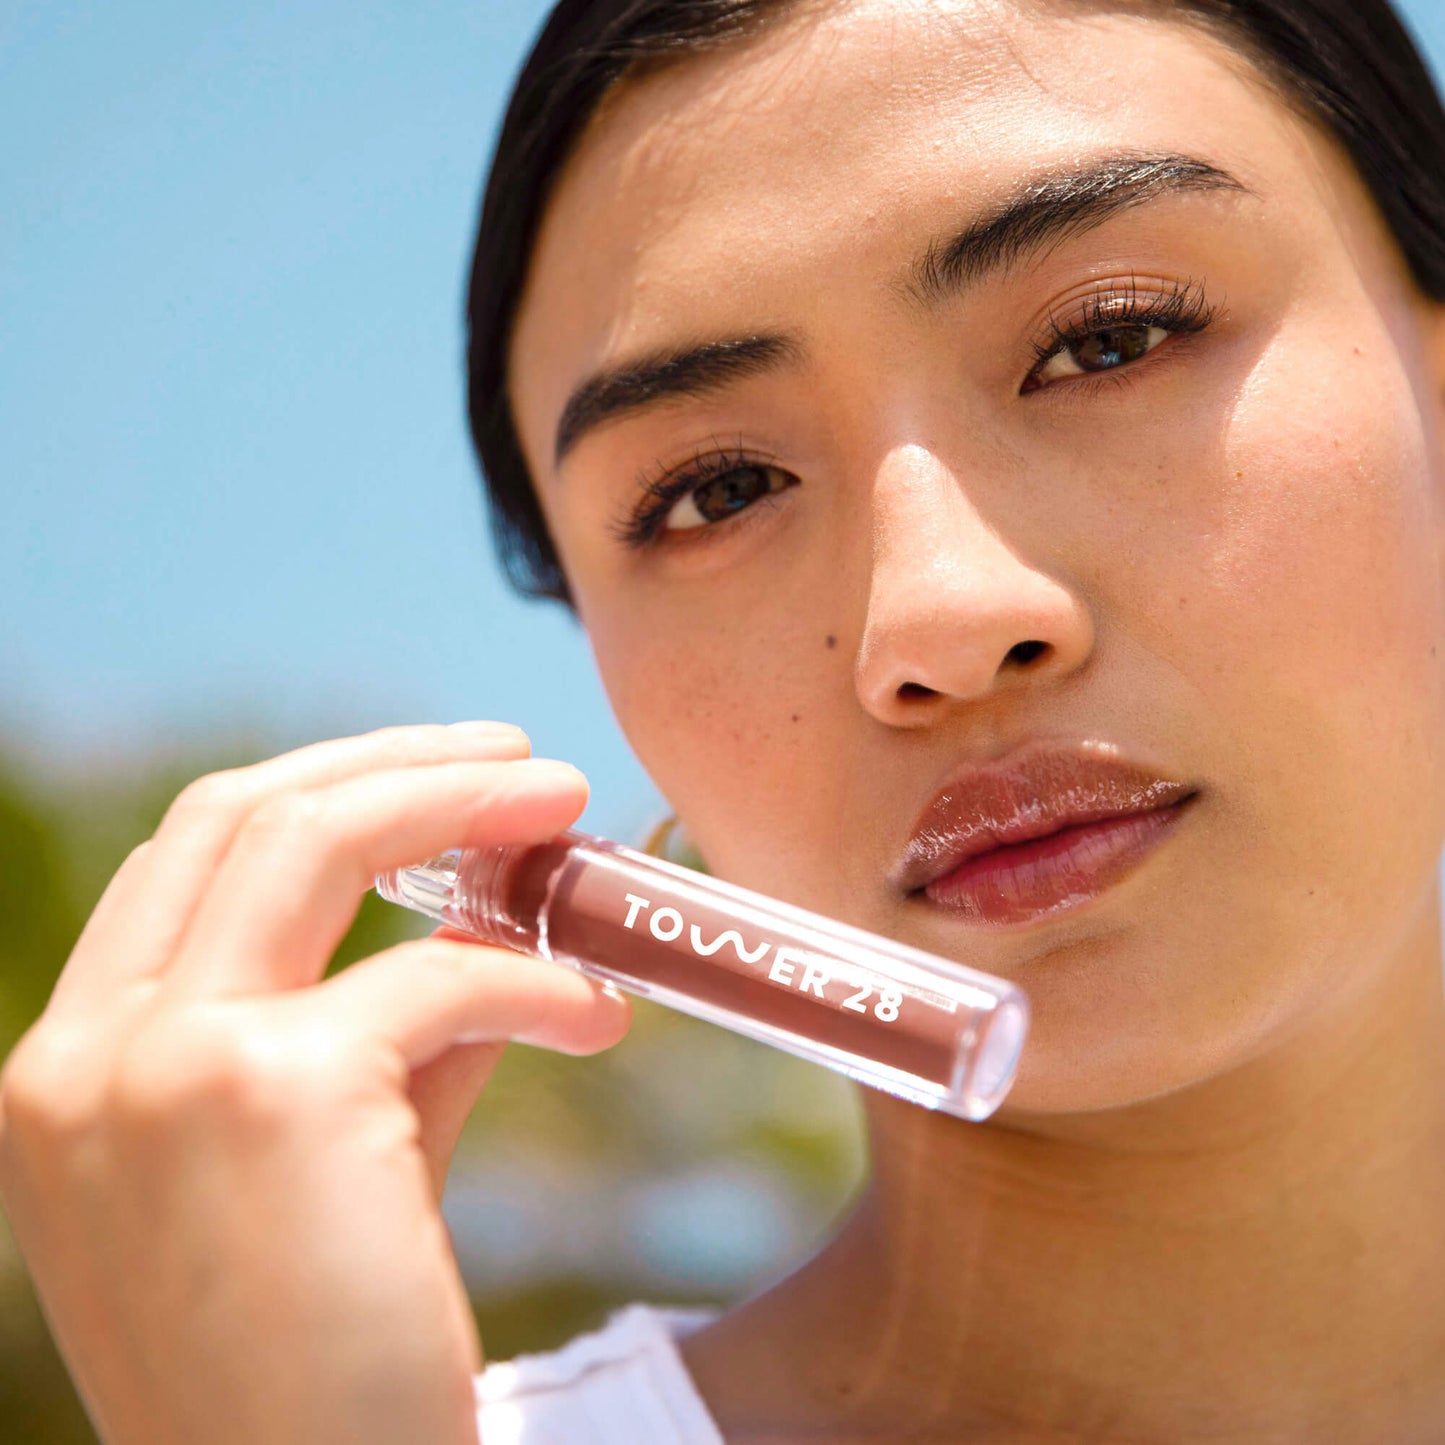 Almond [A model wearing the Tower 28 Beauty ShineOn Lip Jelly in the shade Almond on her lips]